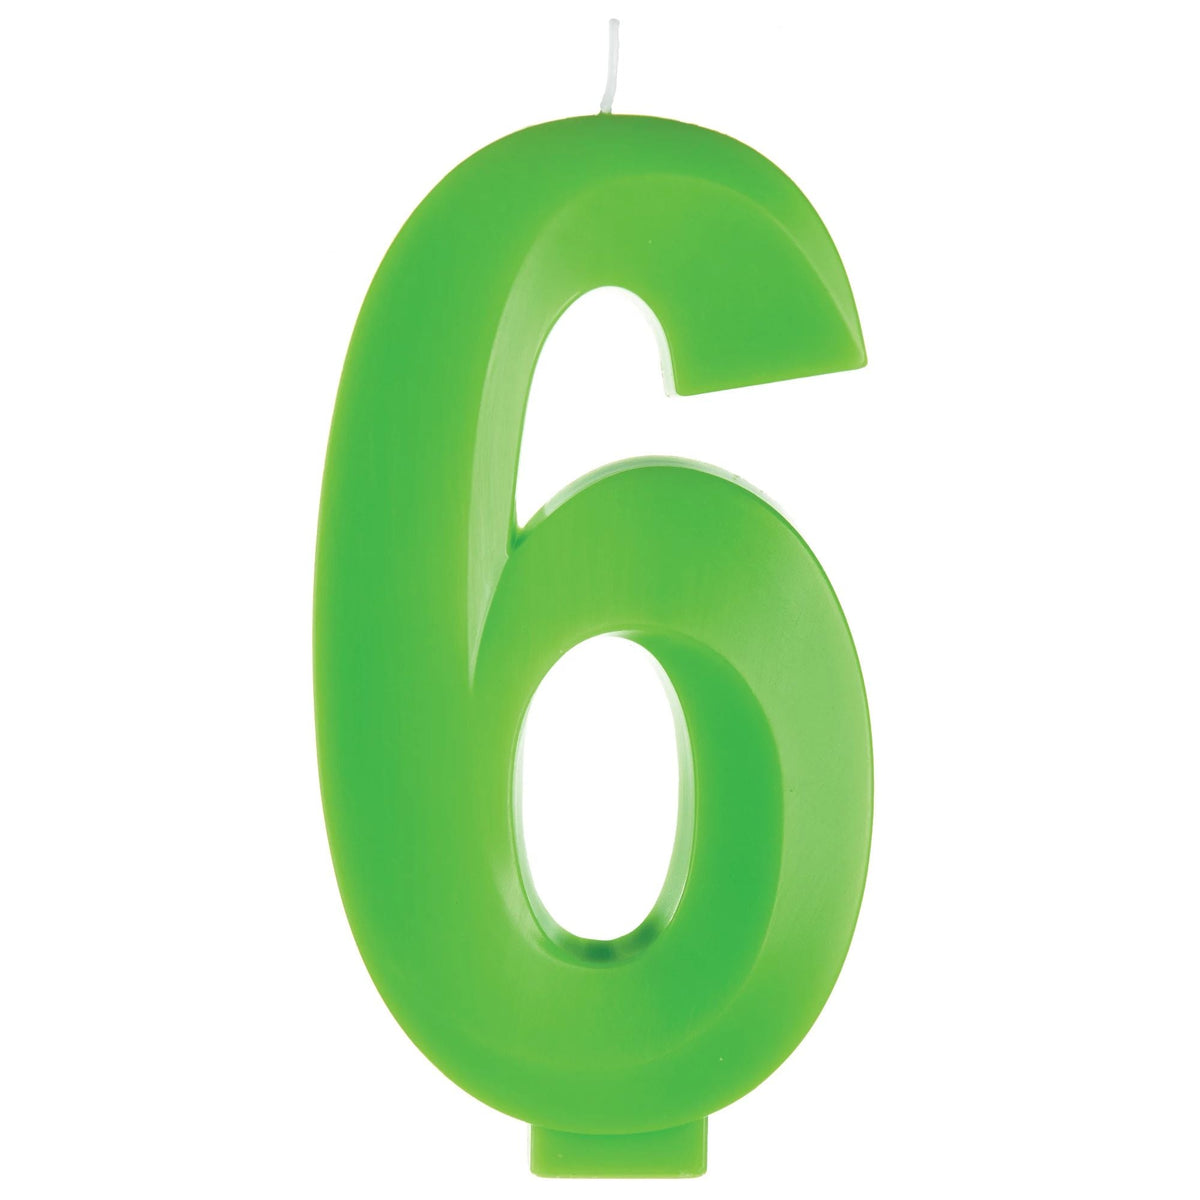 AMSCAN CA Cake Supplies Green Number 6 Birthday Facet Candle, 1 Count 192937383780